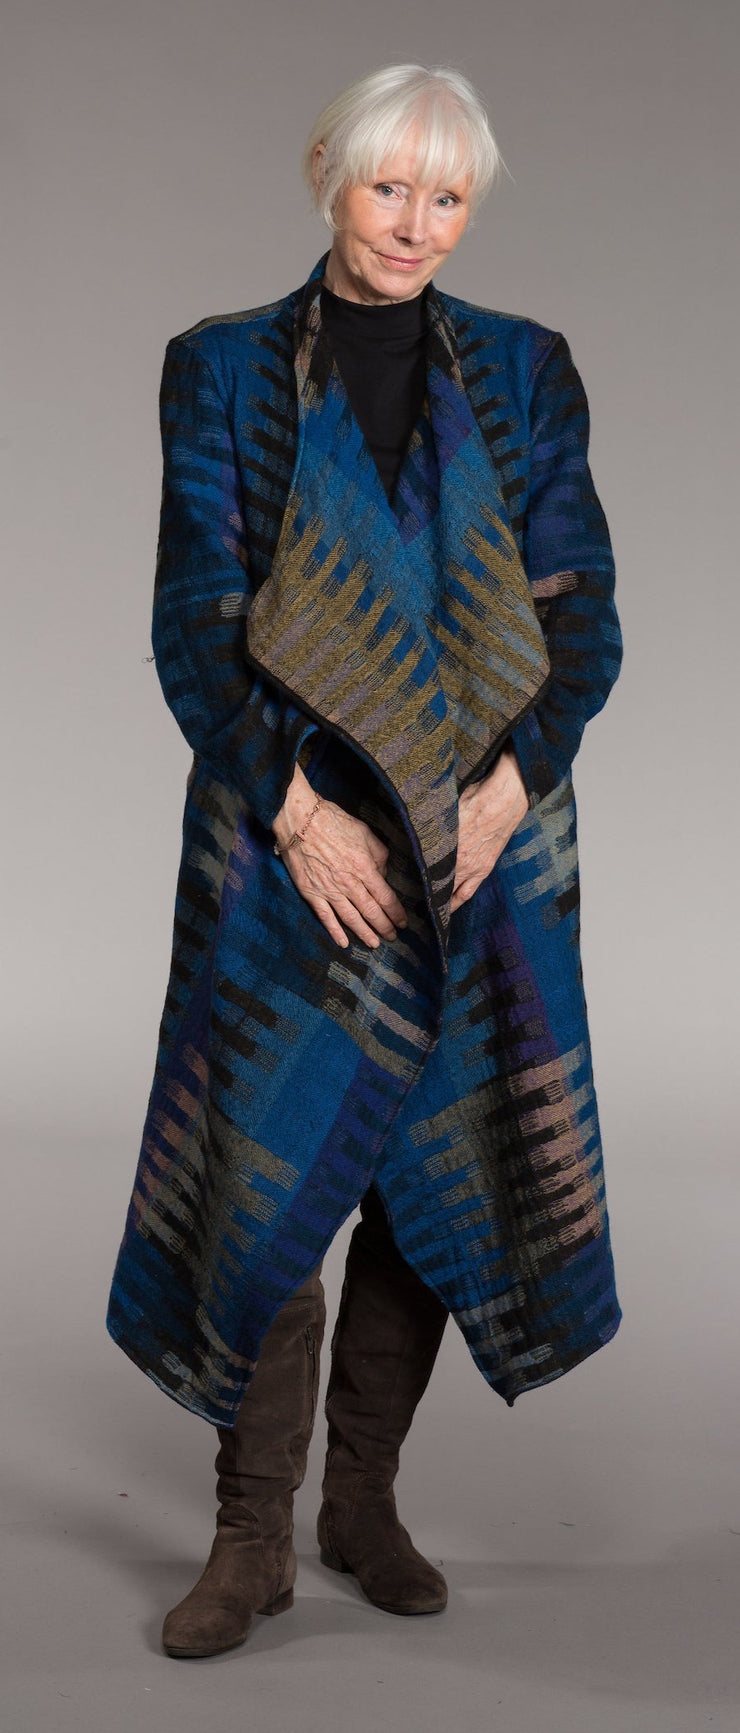 Nellore Jacket in Pure Jacquard Woven Wool AW 2022